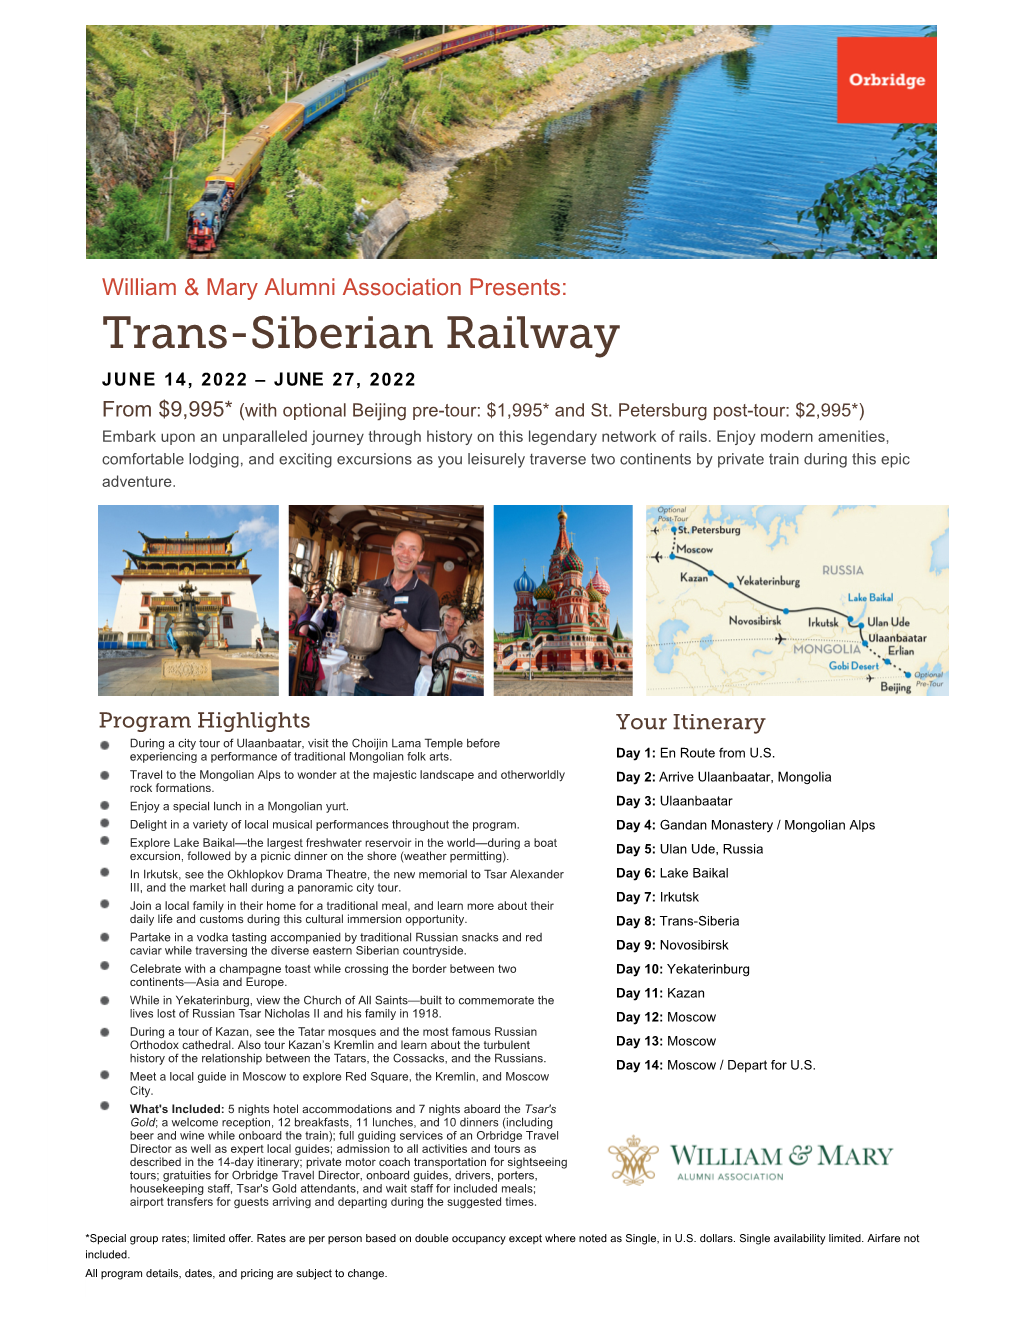 Trans-Siberian Railway JUNE 14, 2022 – JUNE 27, 2022 from $9,995* (With Optional Beijing Pre-Tour: $1,995* and St